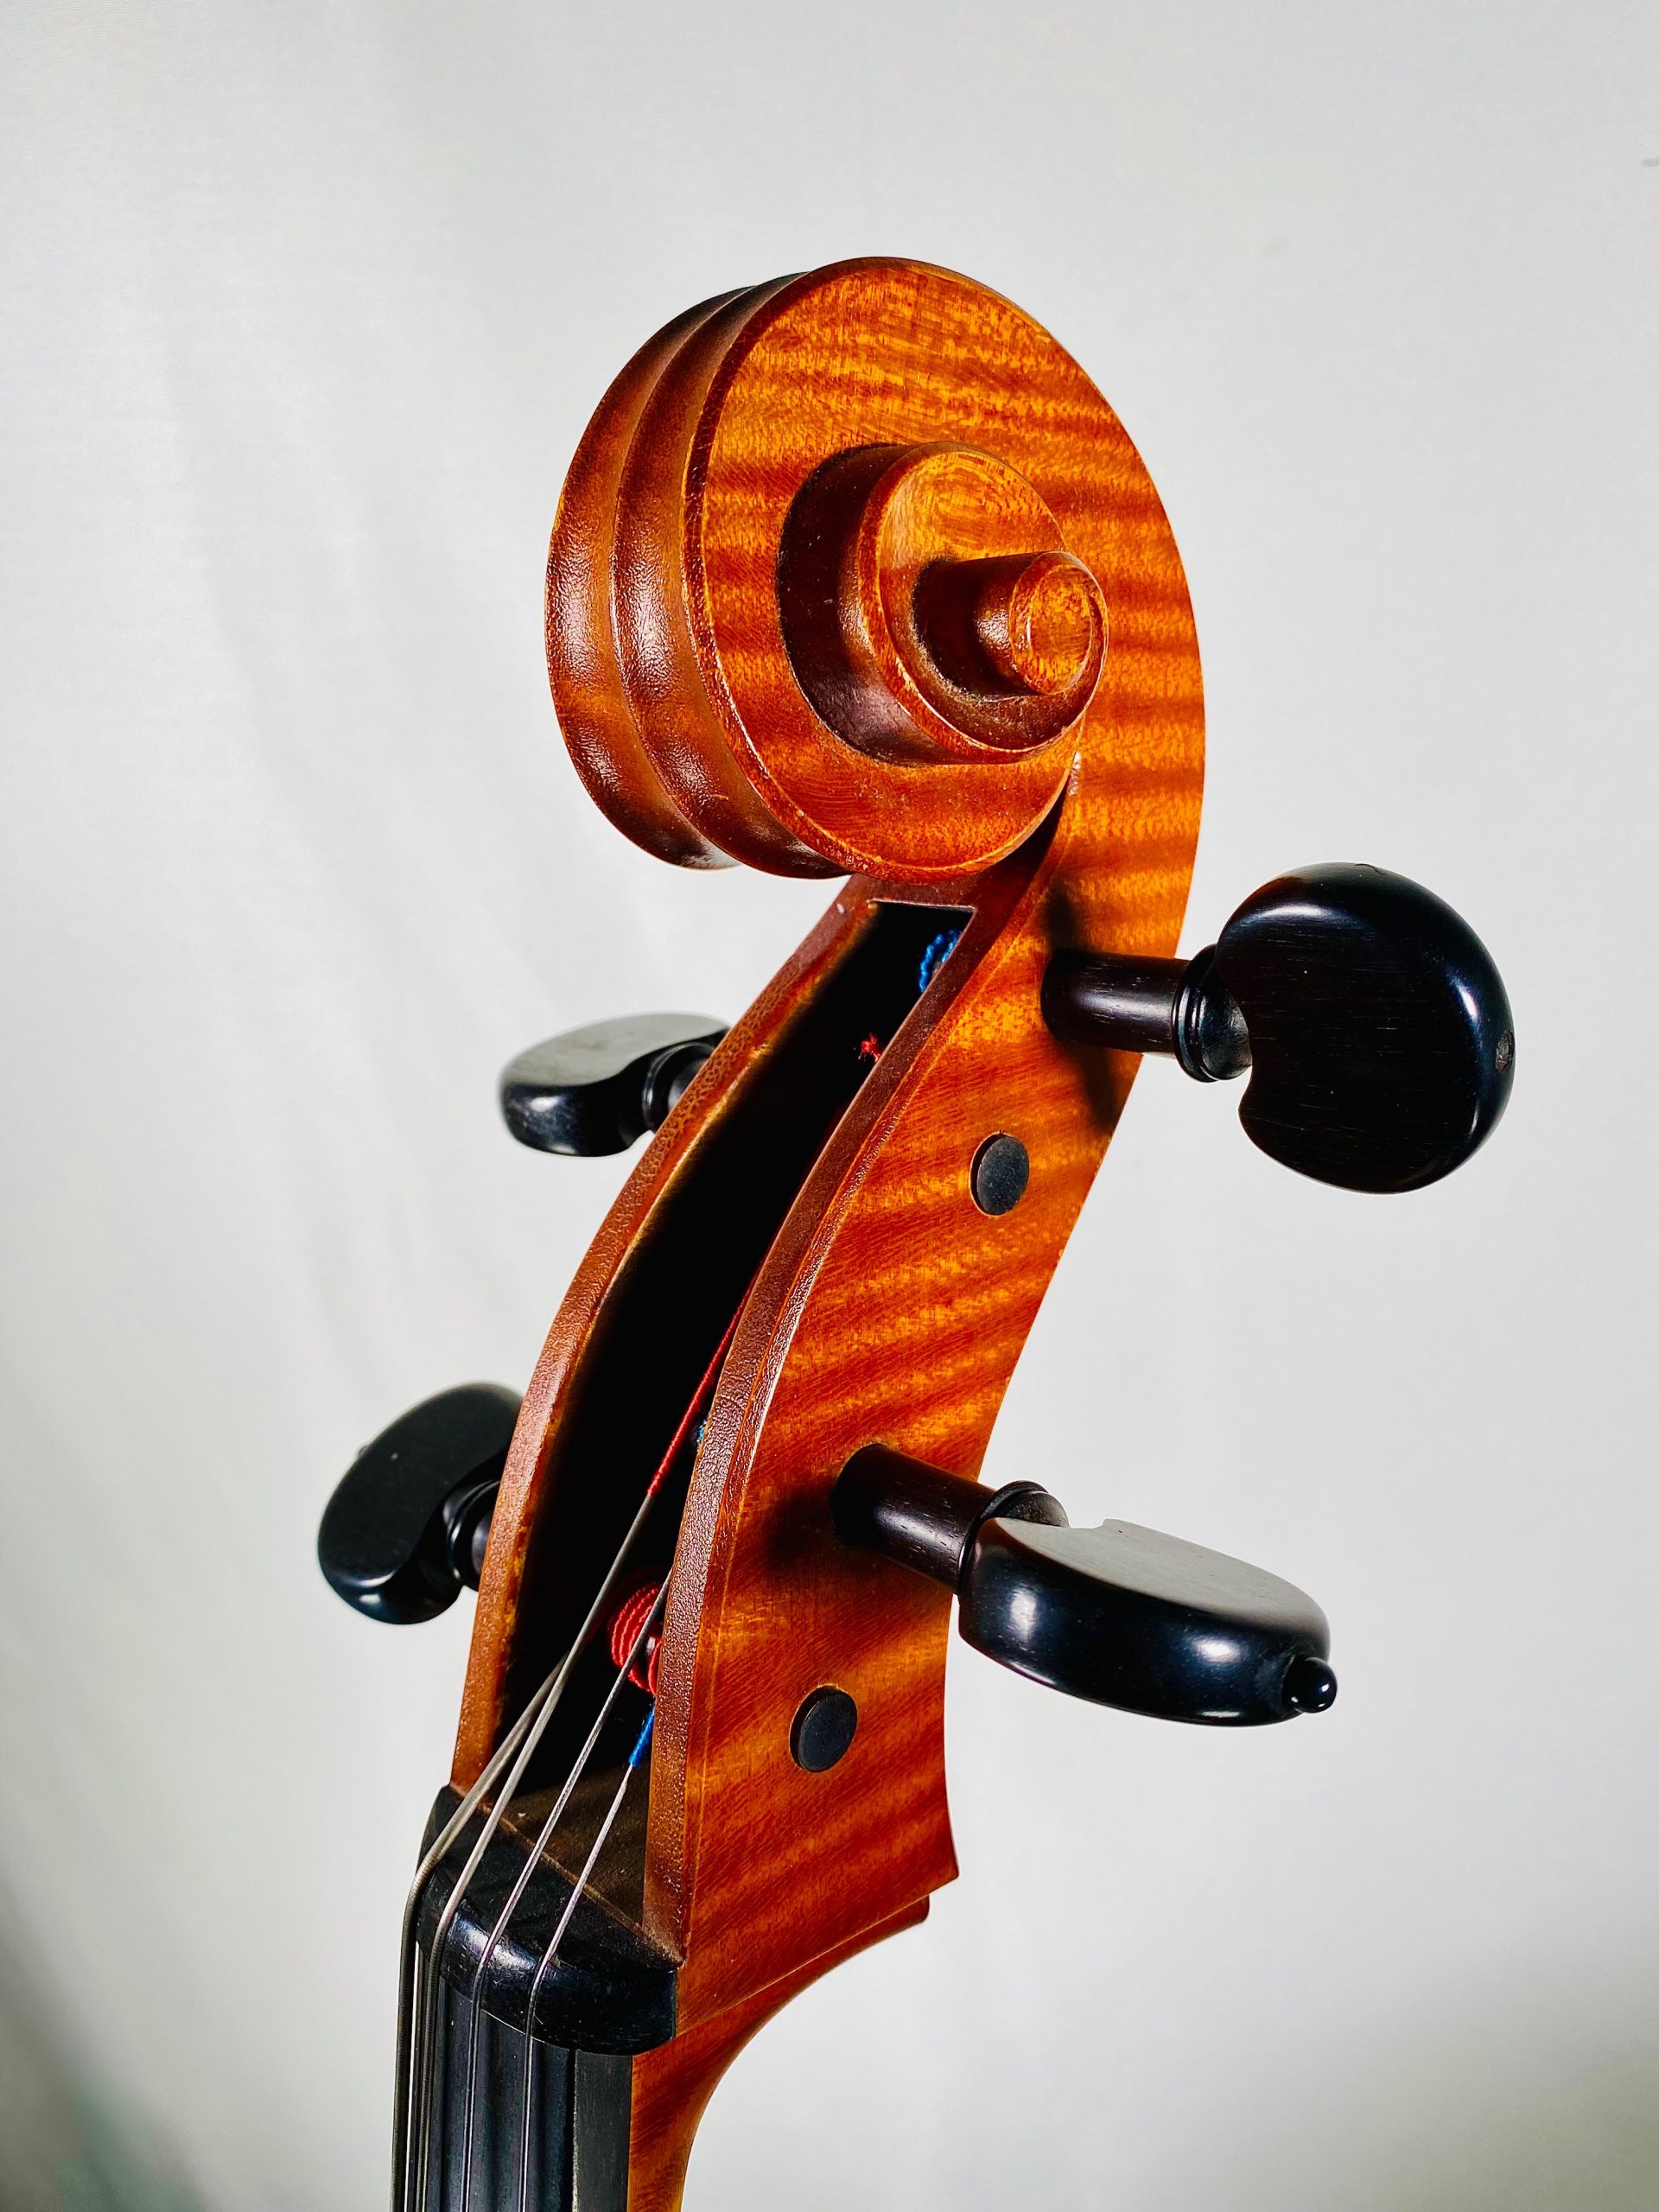 *Silvio Levaggi, Italy - Cremona, 2004, Violoncello |【DETAILS】 ]] ]]-Body Length： 754mm]]-Upper Bouts: 339mm]]-Middle Bouts: 233mm]]-Lower Bouts: 433m […]